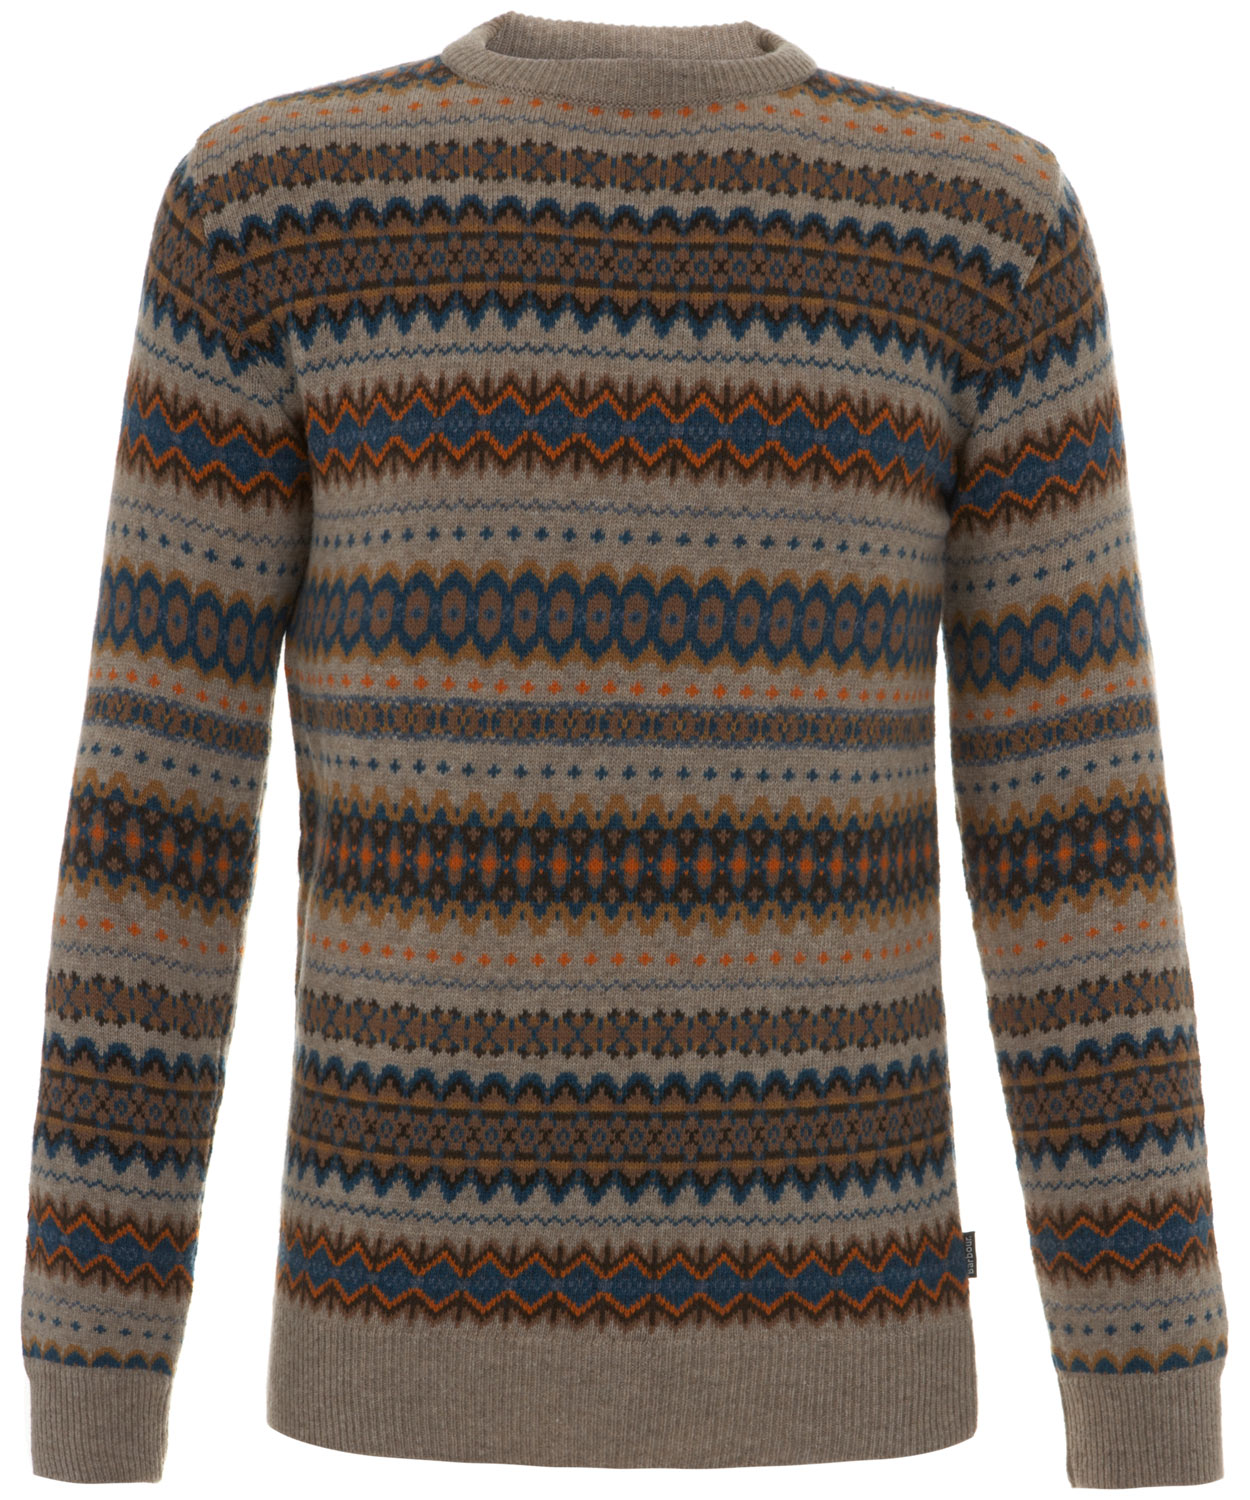 Barbour Brown Caister Fairisle Knitted Wool Jumper in Brown for Men - Lyst